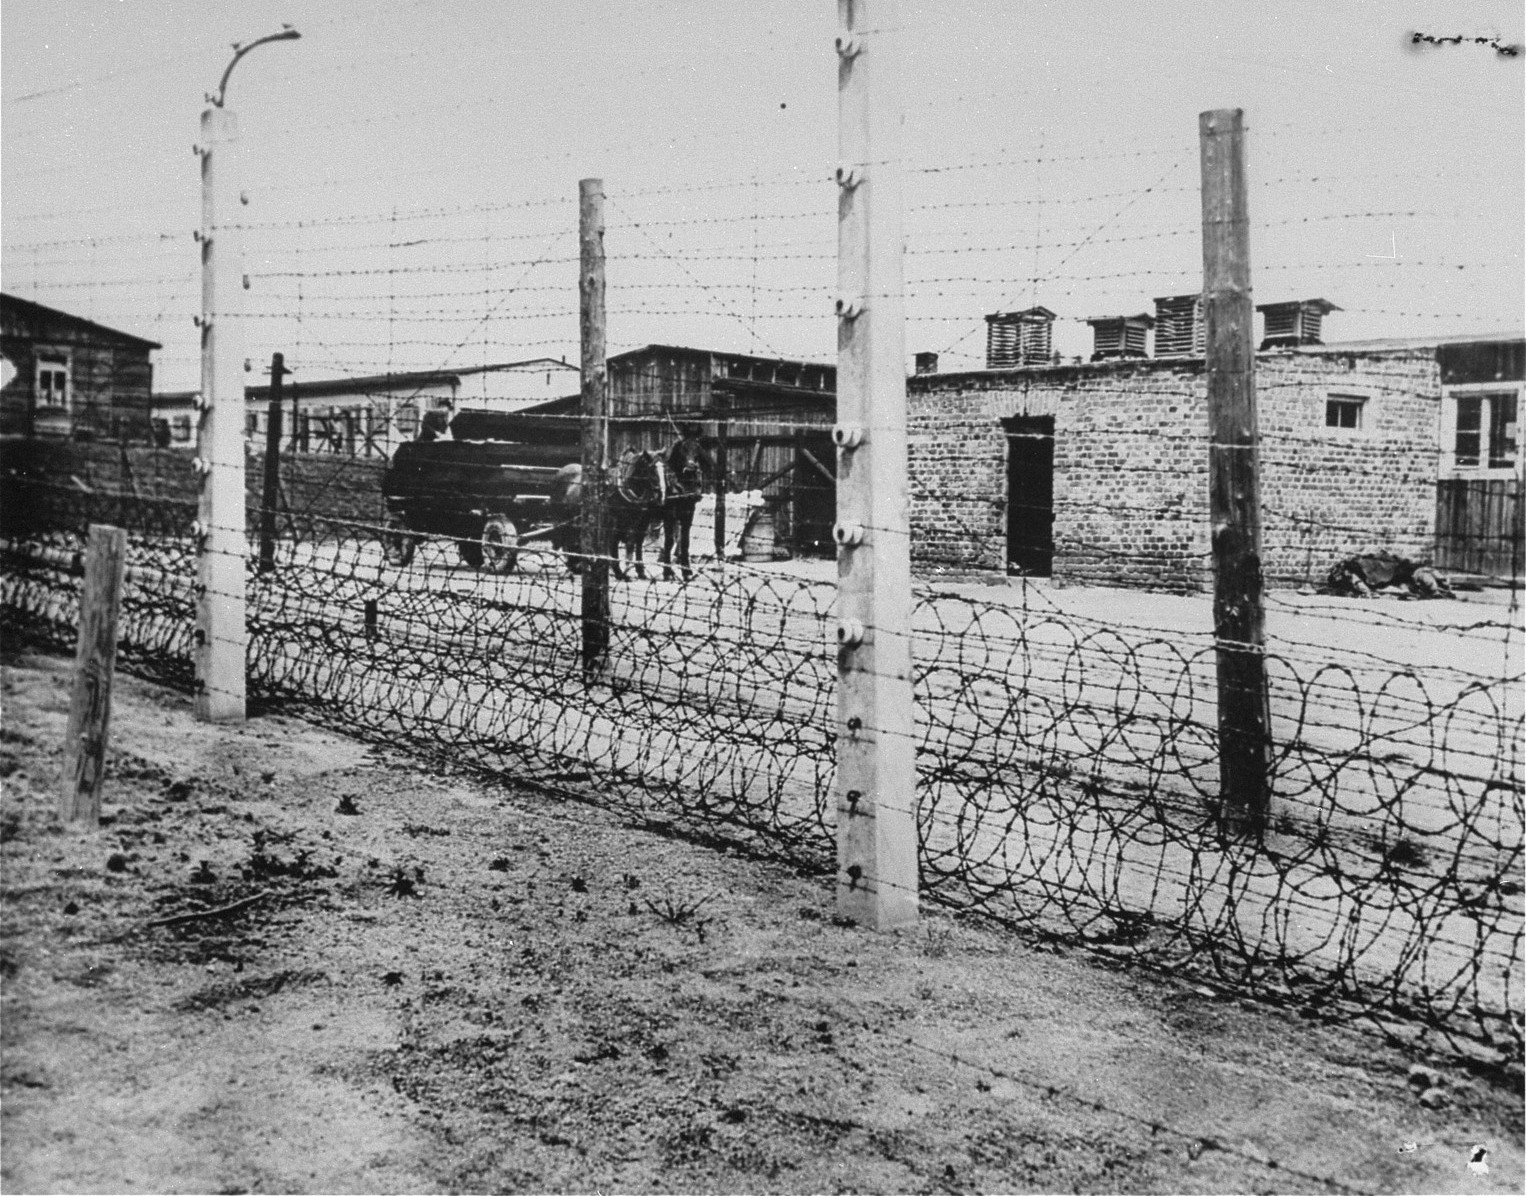 Fence, Flossenbürg Concentration Camp, Germany, 3 May 1945